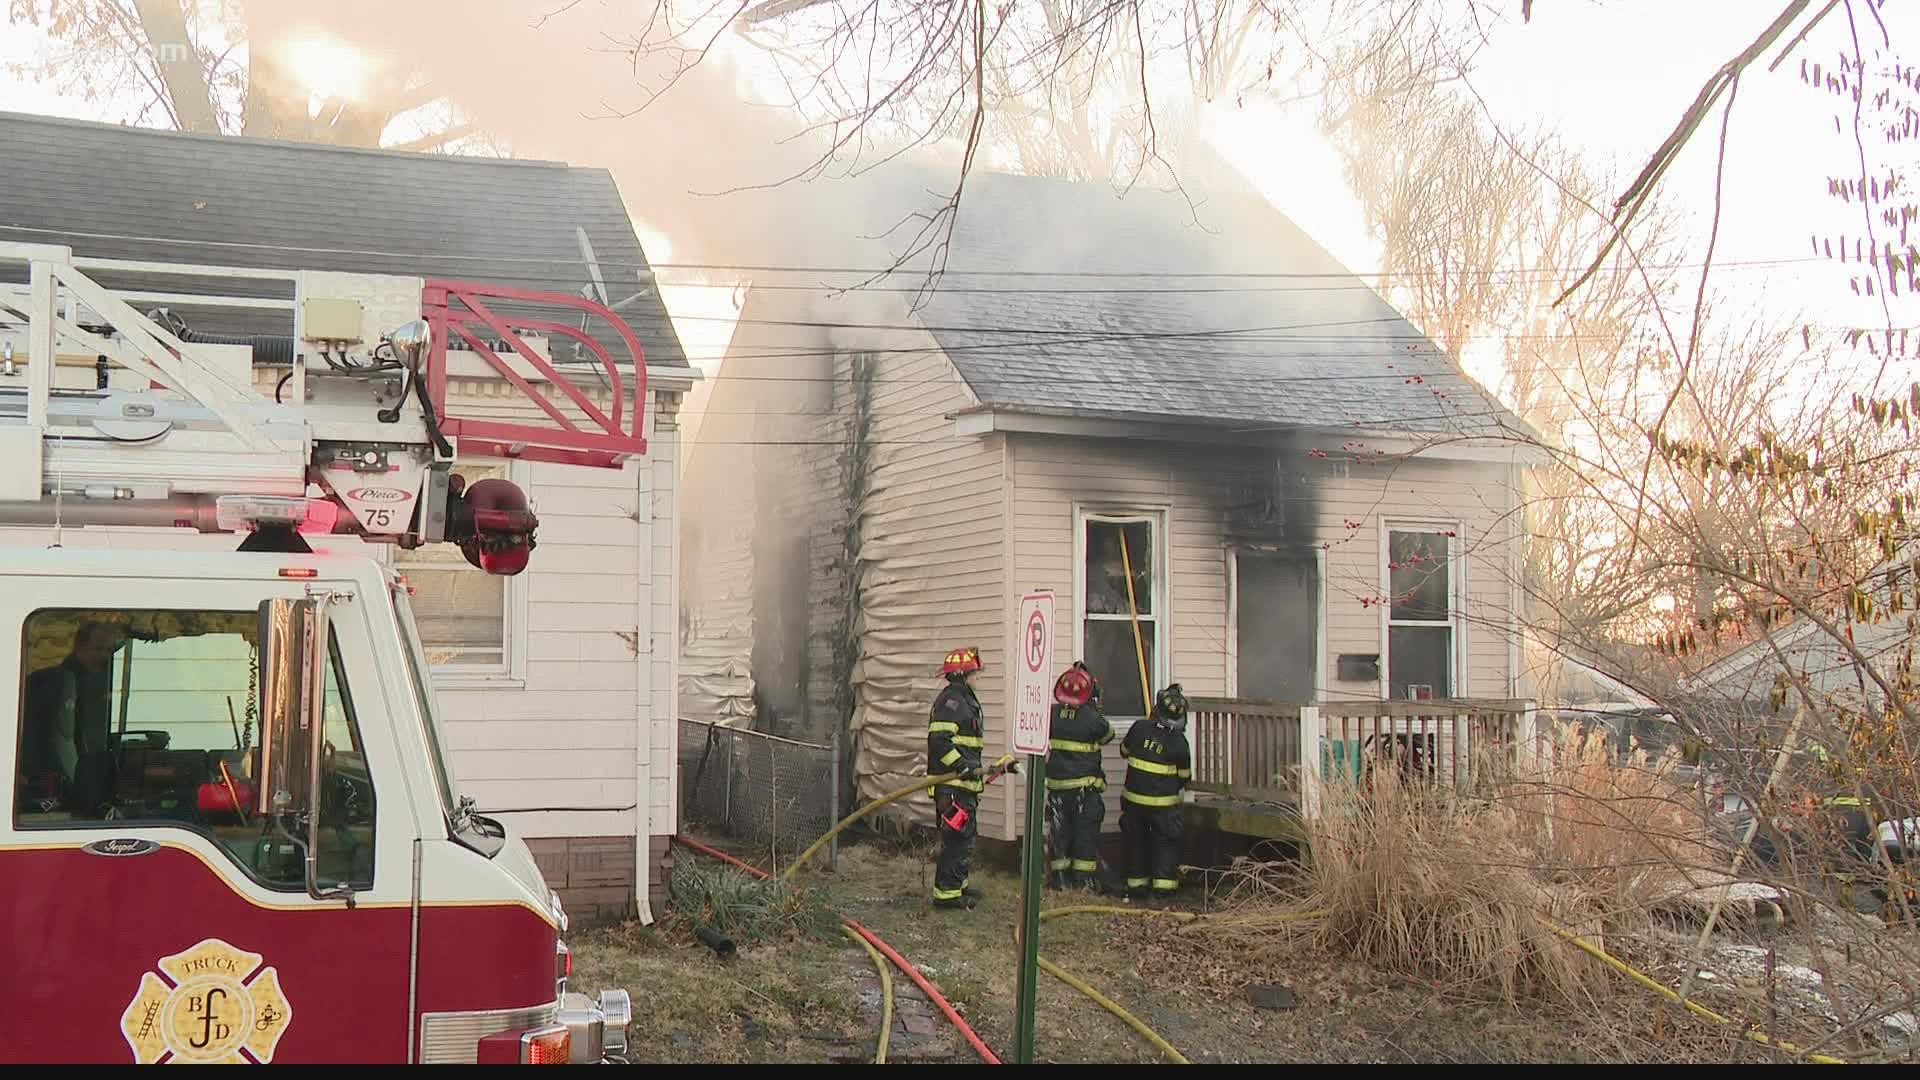 The fire happened at a home along Rodenmeyer Street Tuesday morning.